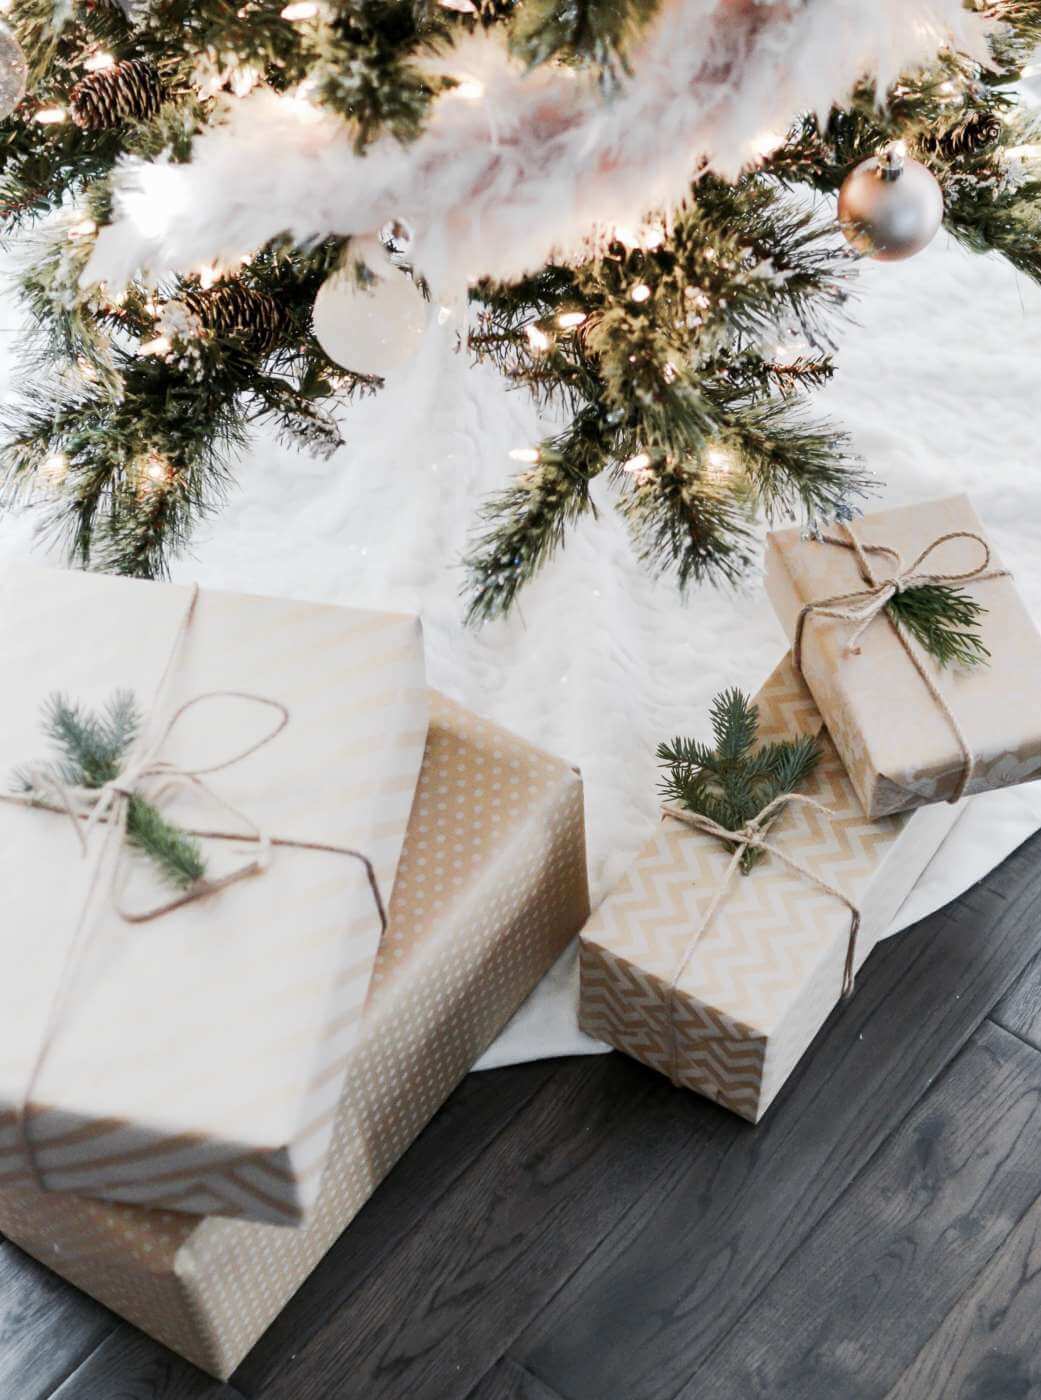 DIY christmas gifts for friends